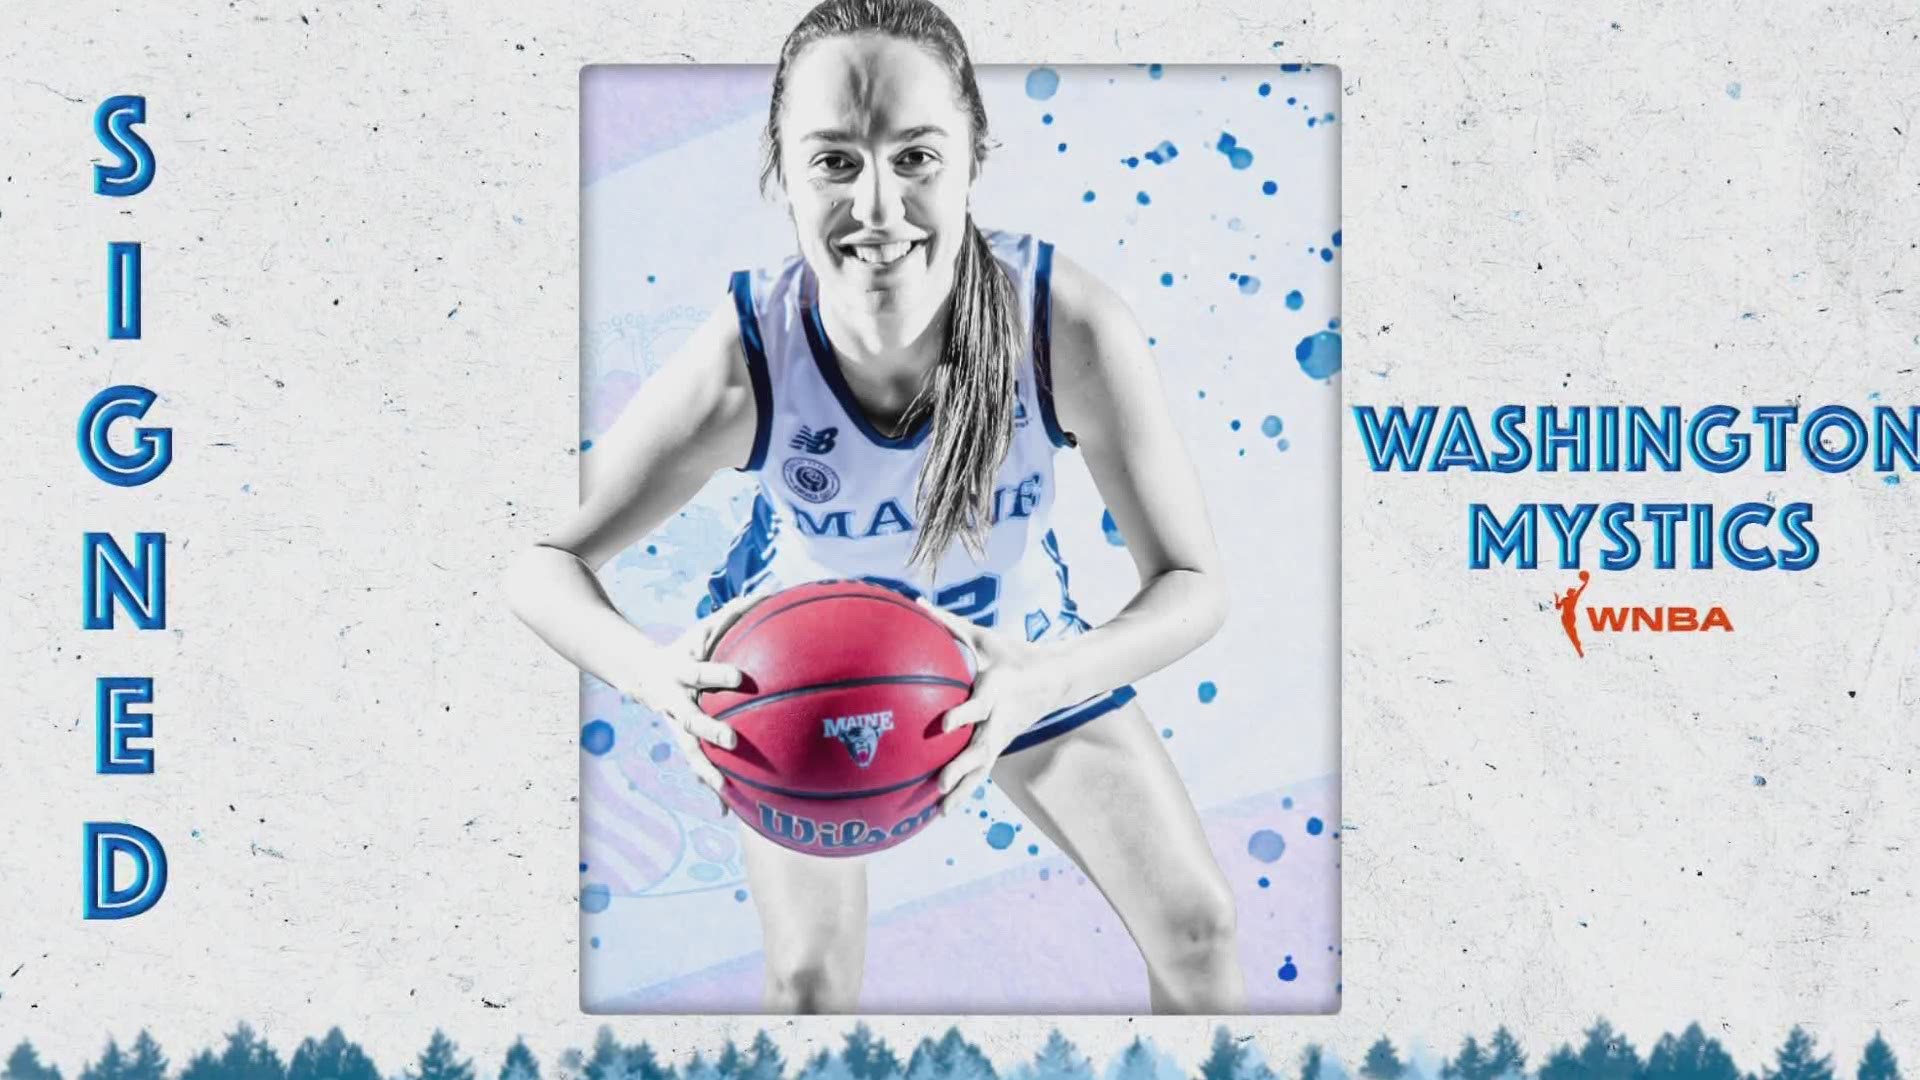 The guard, Blanca Millan, has signed a training camp contract with the Washington Mystics.